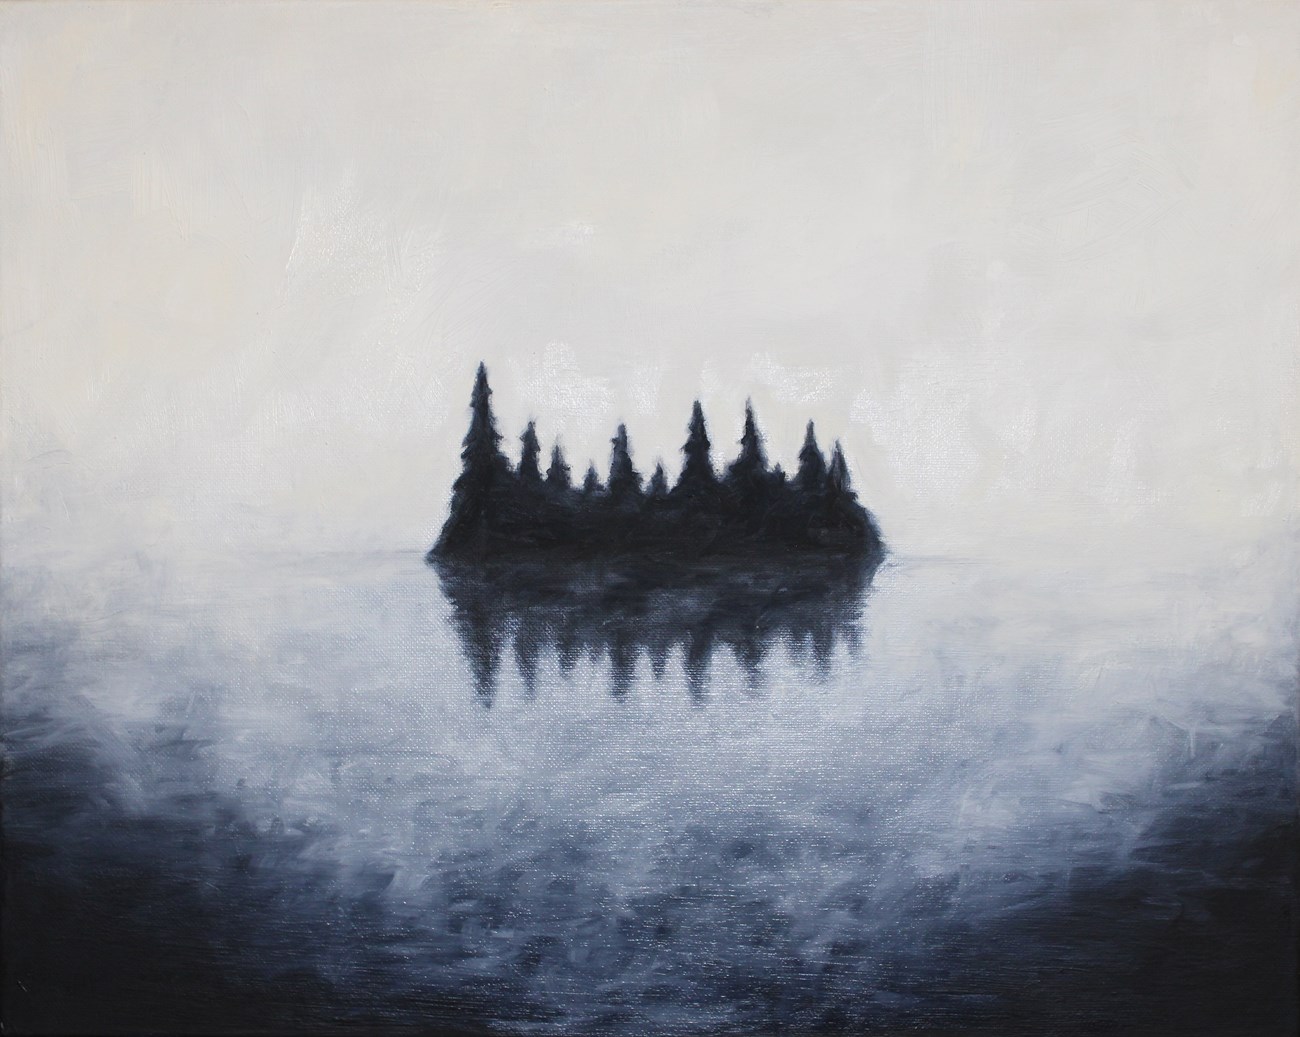 small, dark island with reflection, surrounded by a yellow/gray fog and dark water